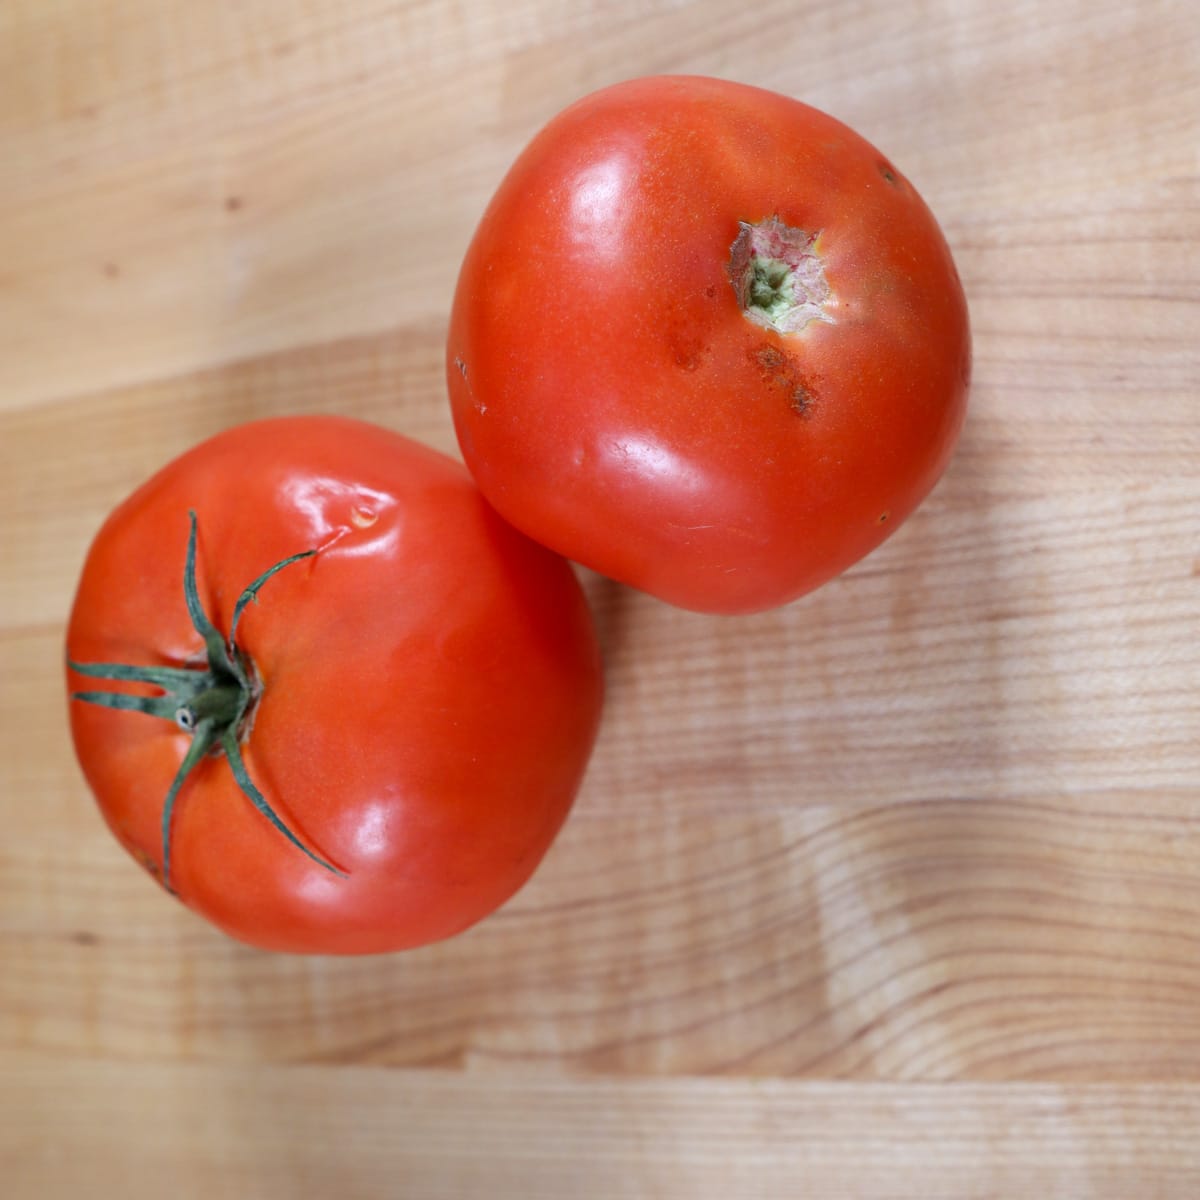 tomatoes gone bad on a cutting board
